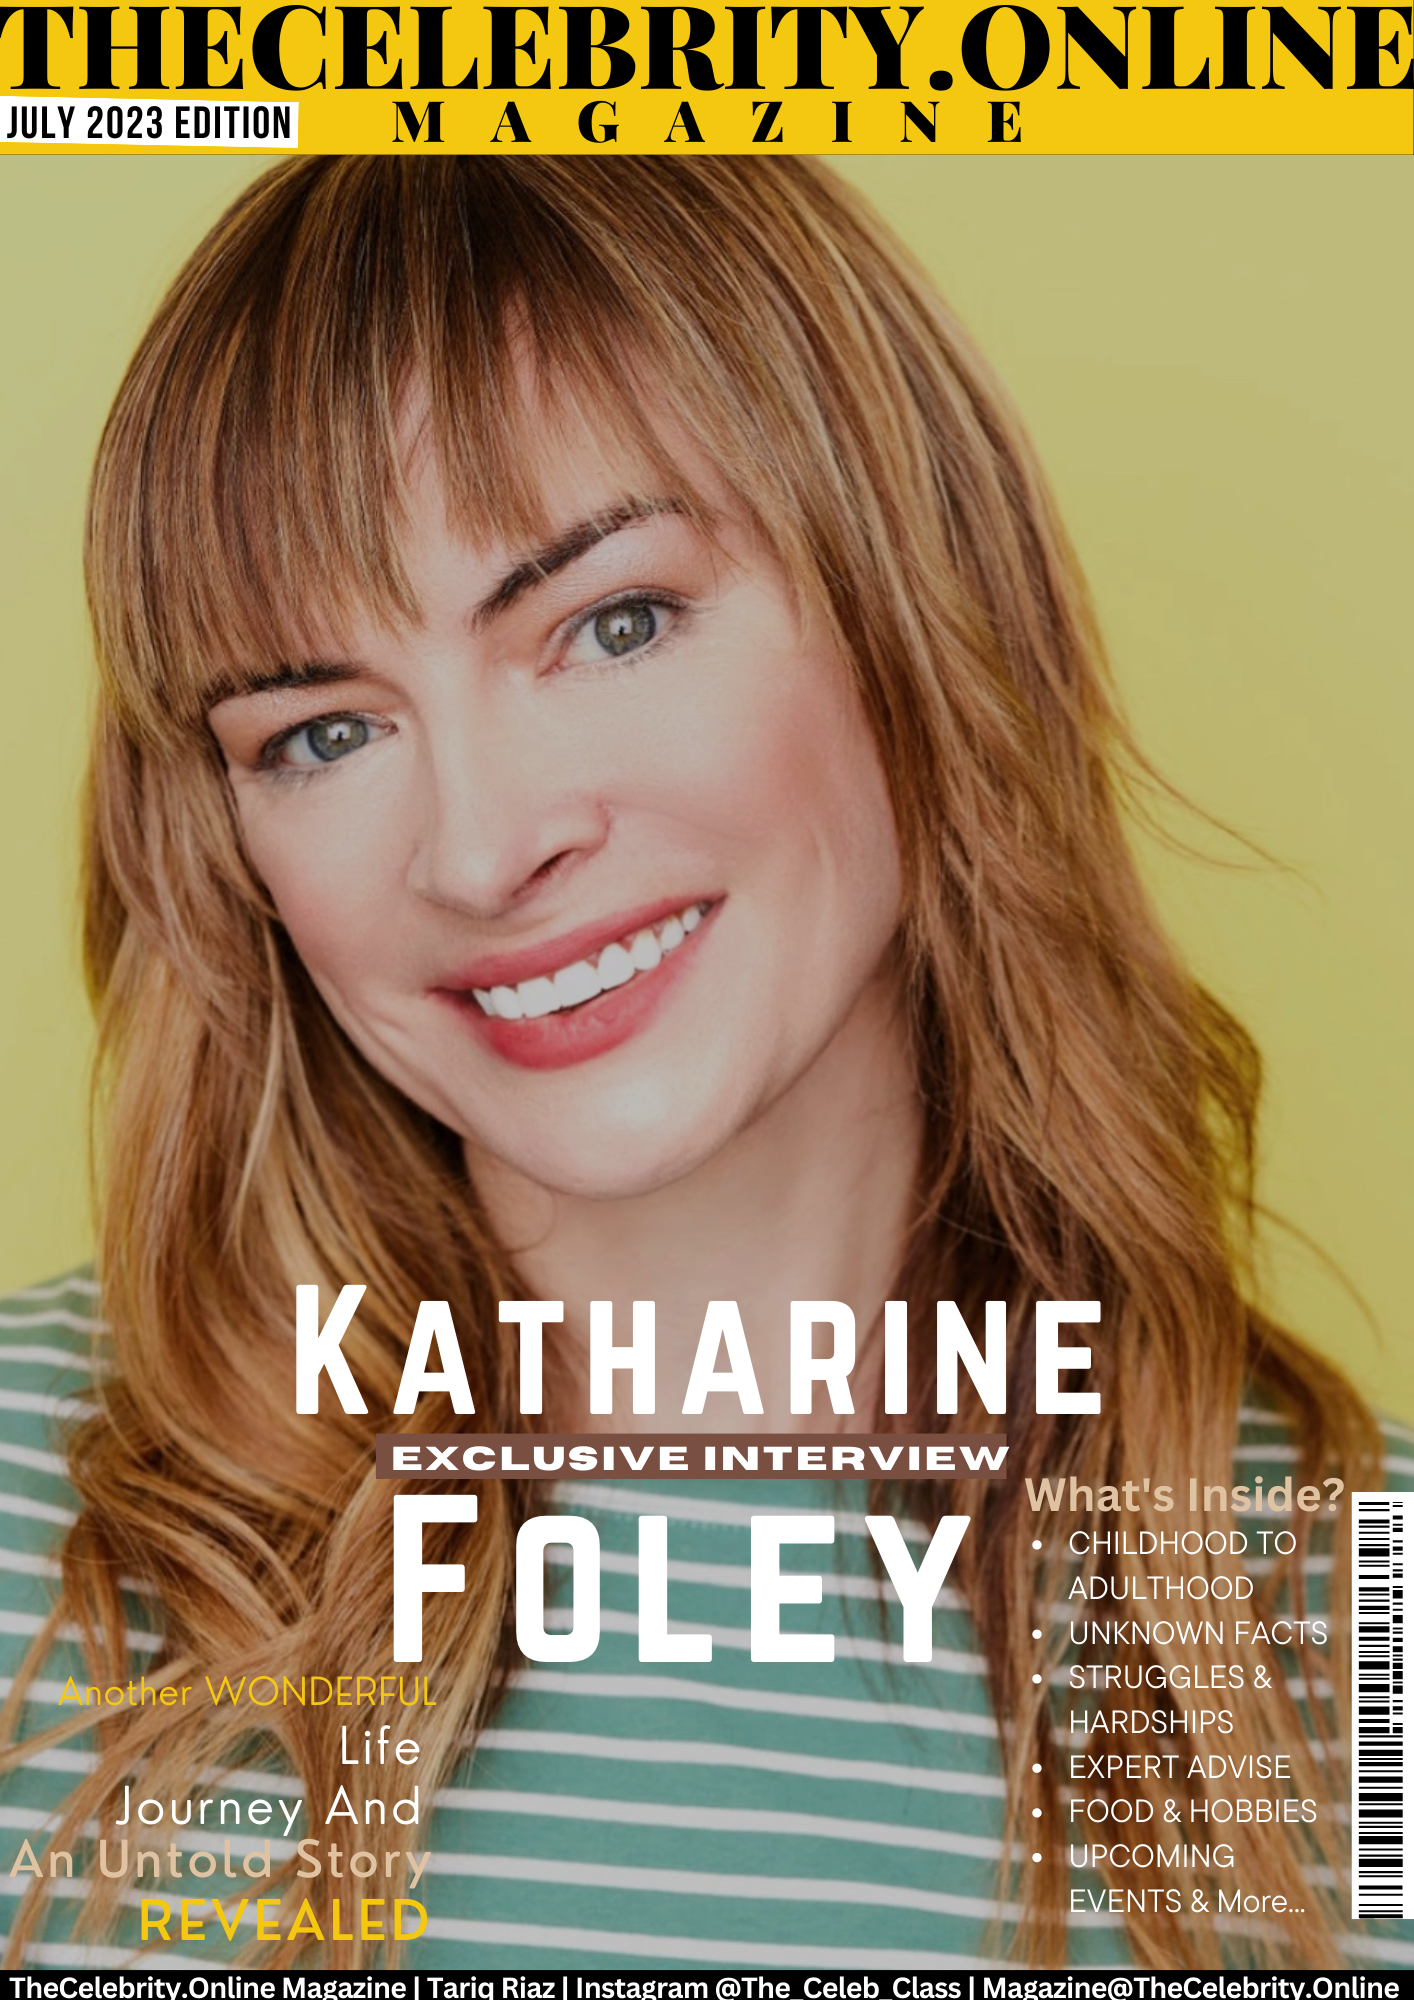 Katharine Foley Exclusive Interview – ‘Go For The Job You Love’